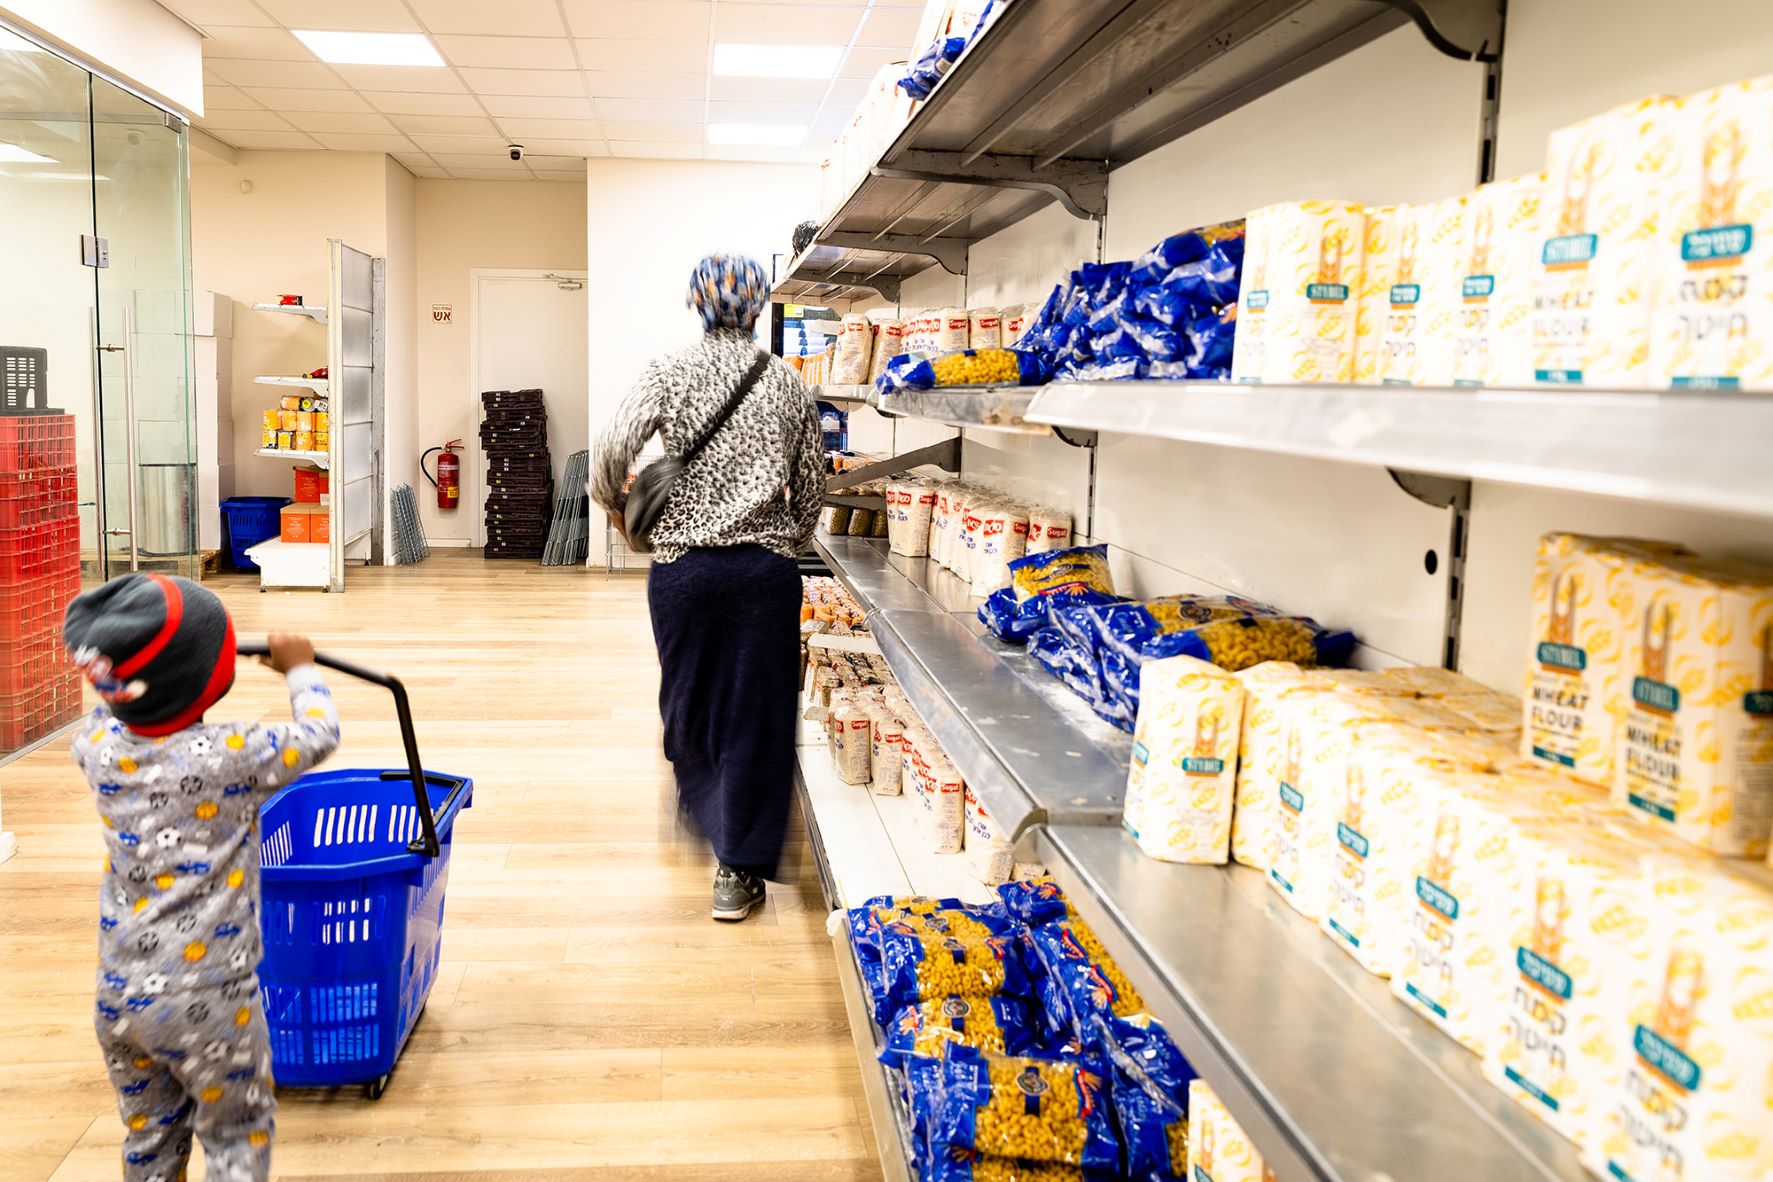 Providing food security to asylum seekers and undocumented individuals